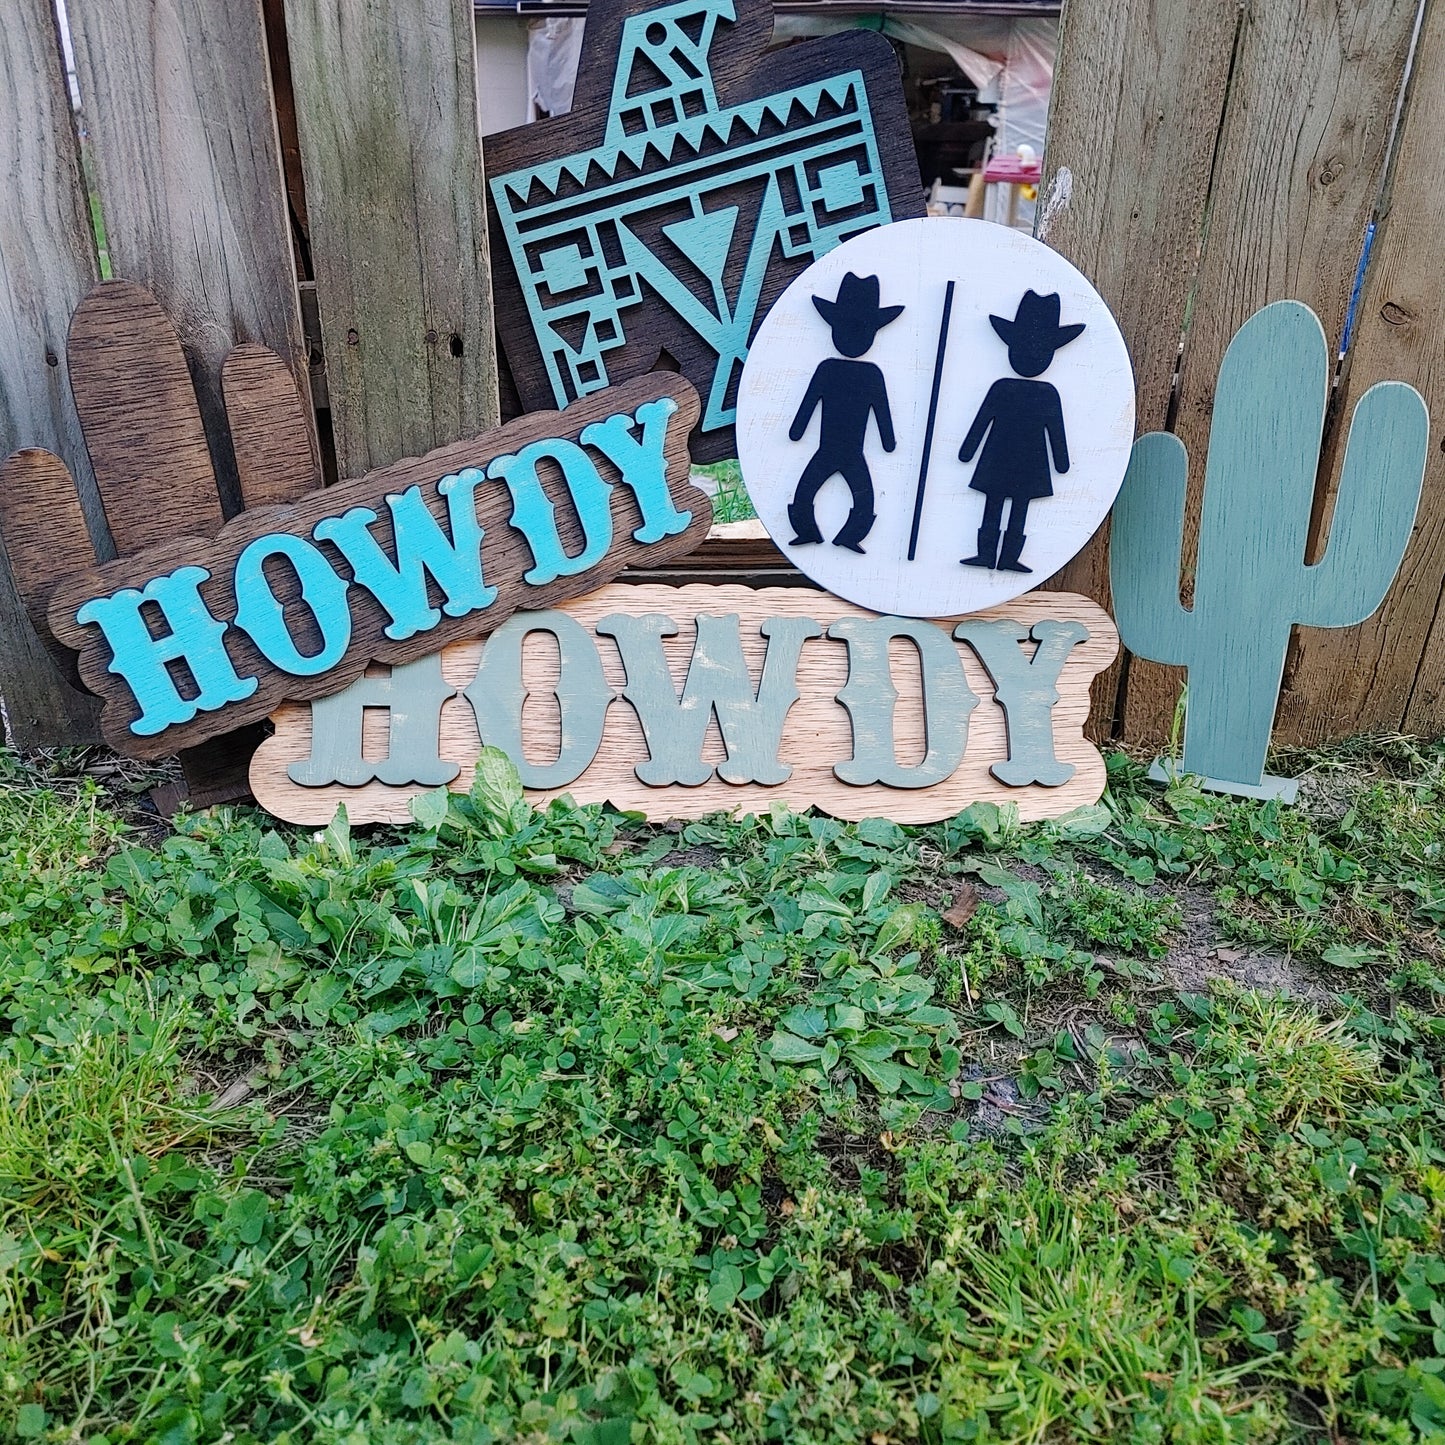 HOWDY SIGNS